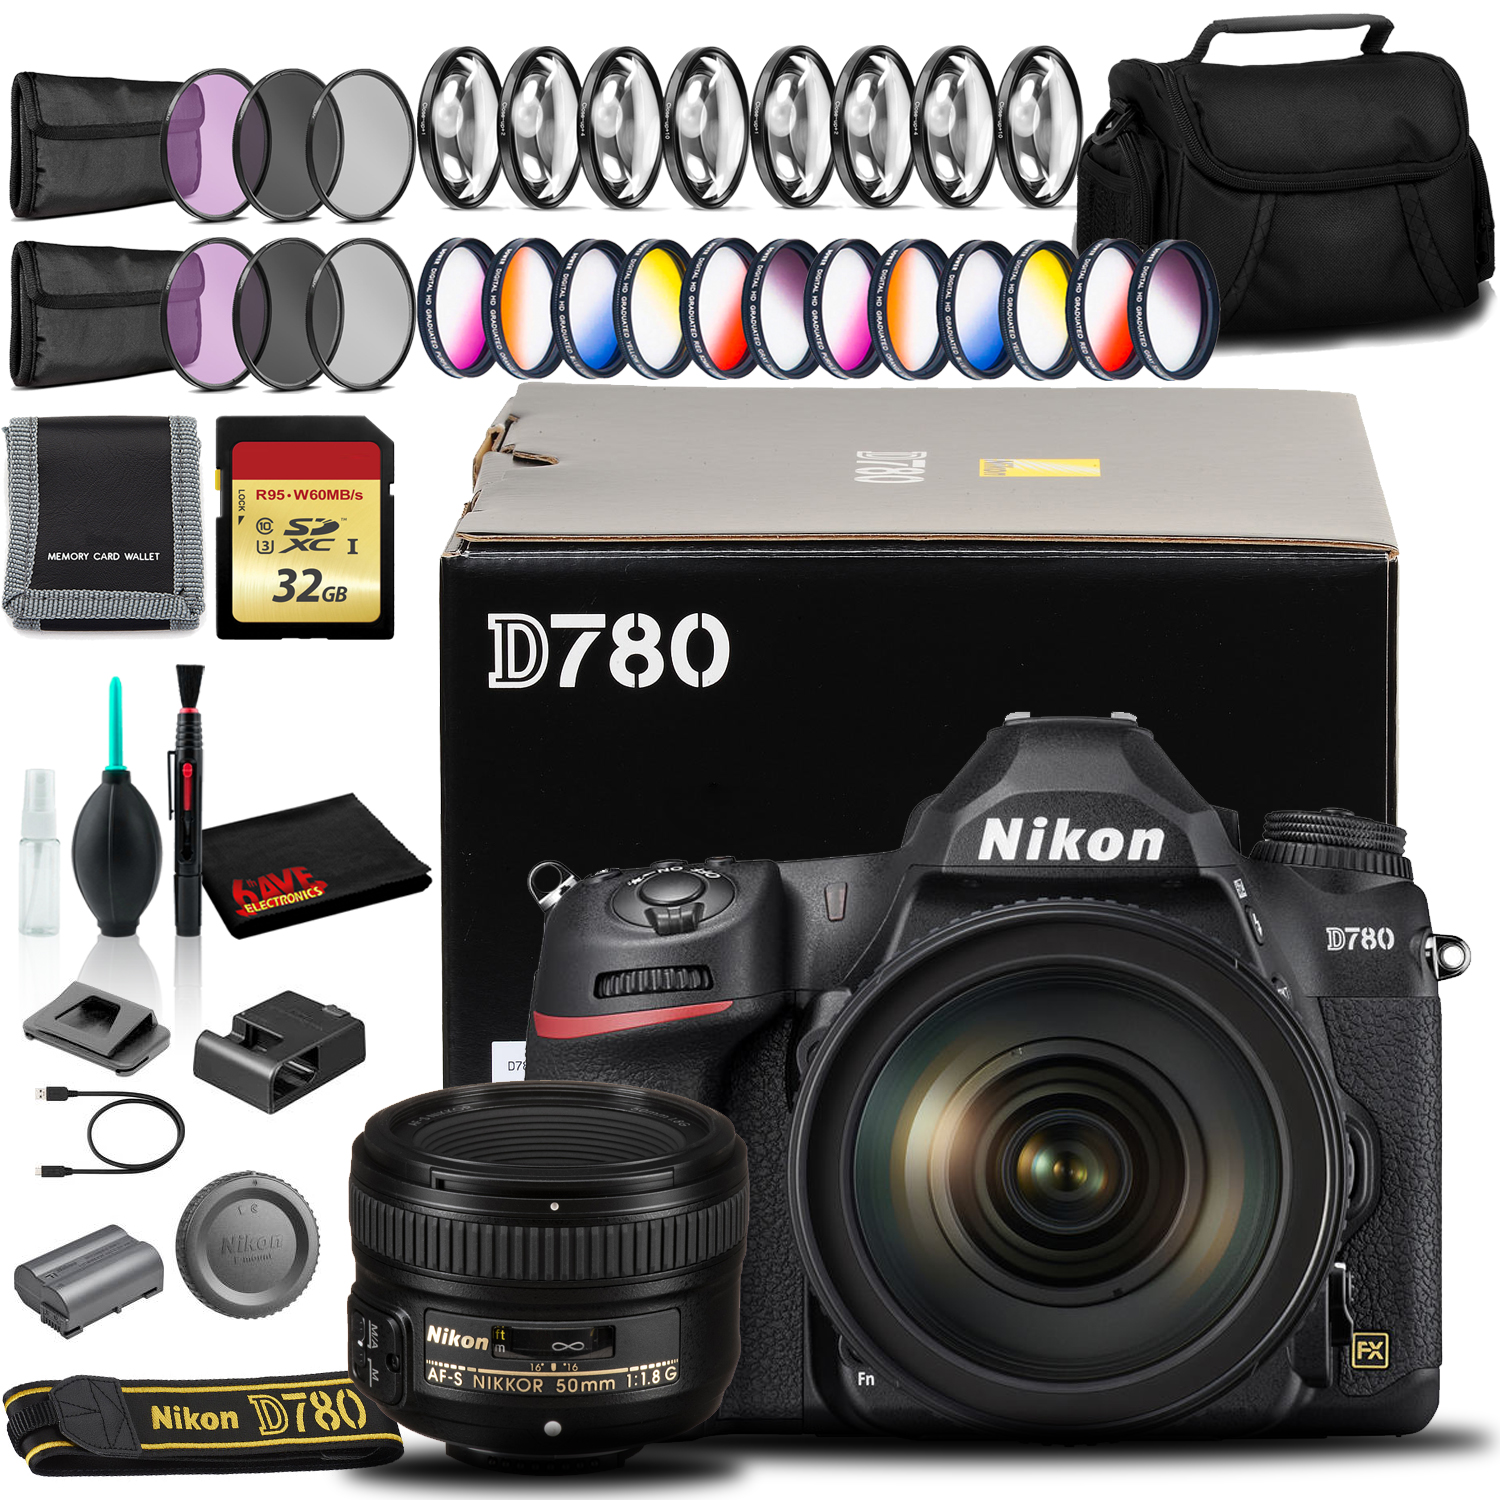 Nikon D780 DSLR Camera with 24-120mm, 50mm Lens, 32GB SD, and More (Intl Model) - image 1 of 9